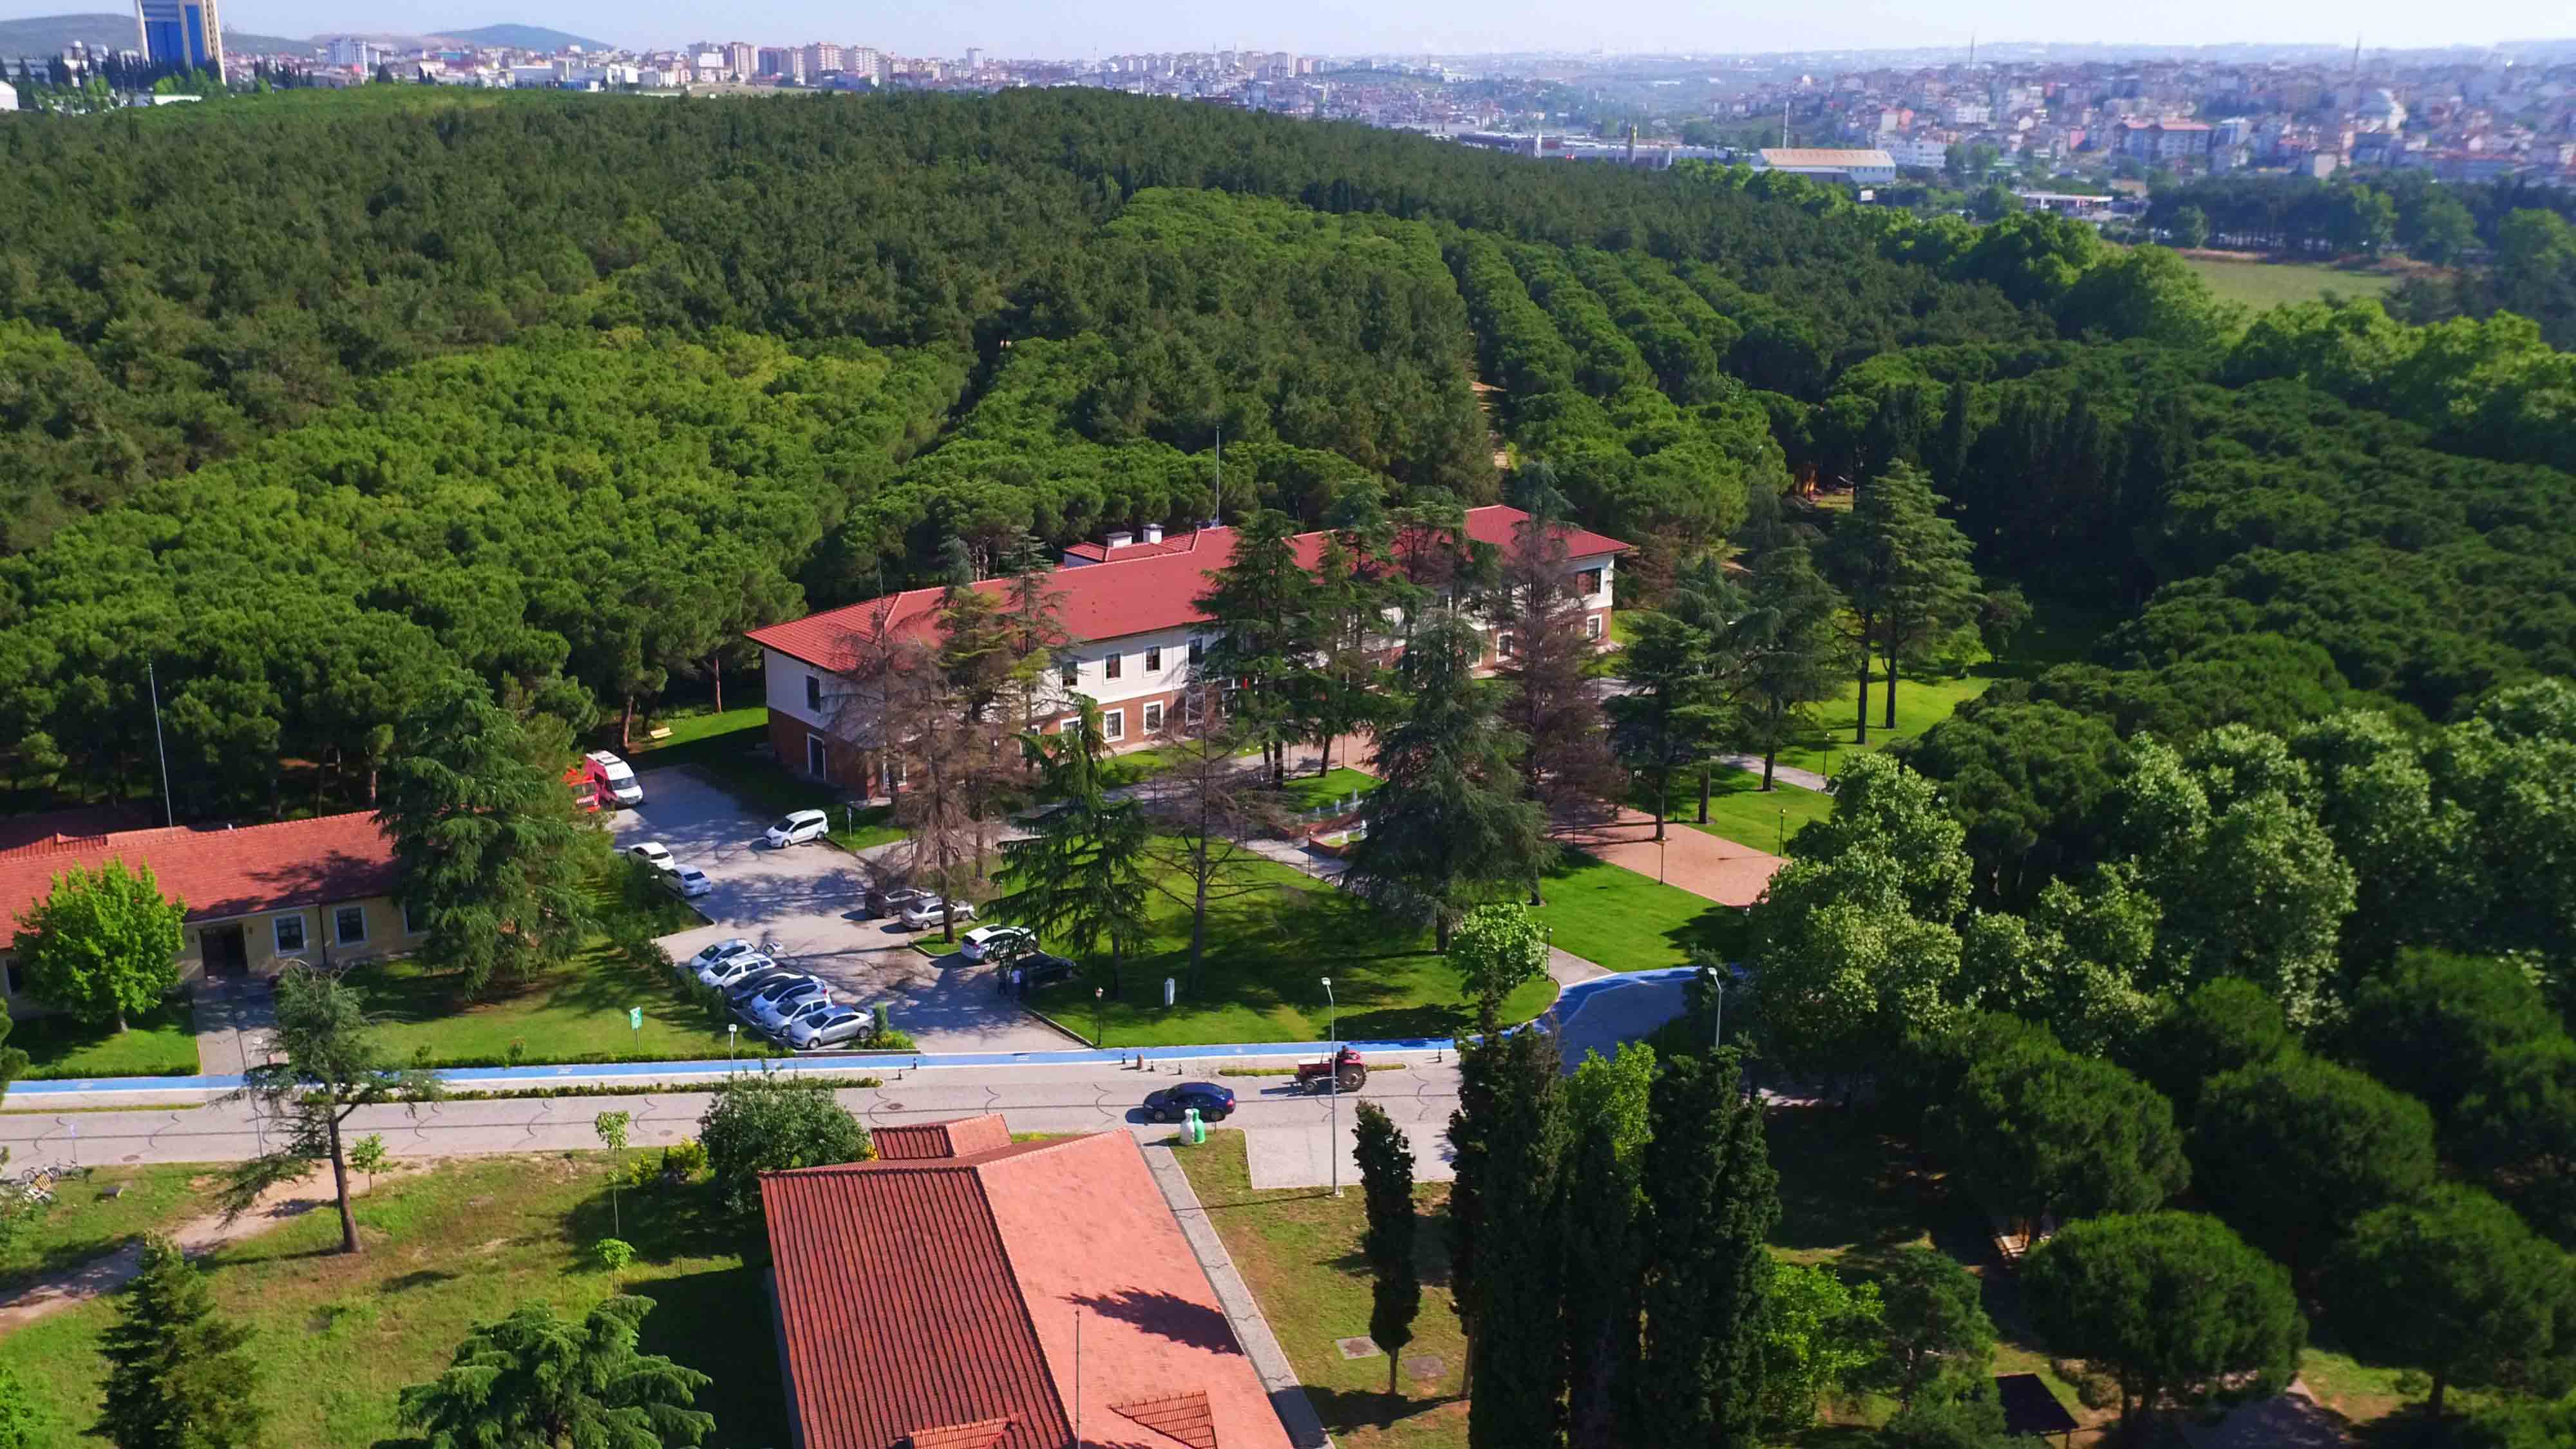 The costs of living in Kocaeli